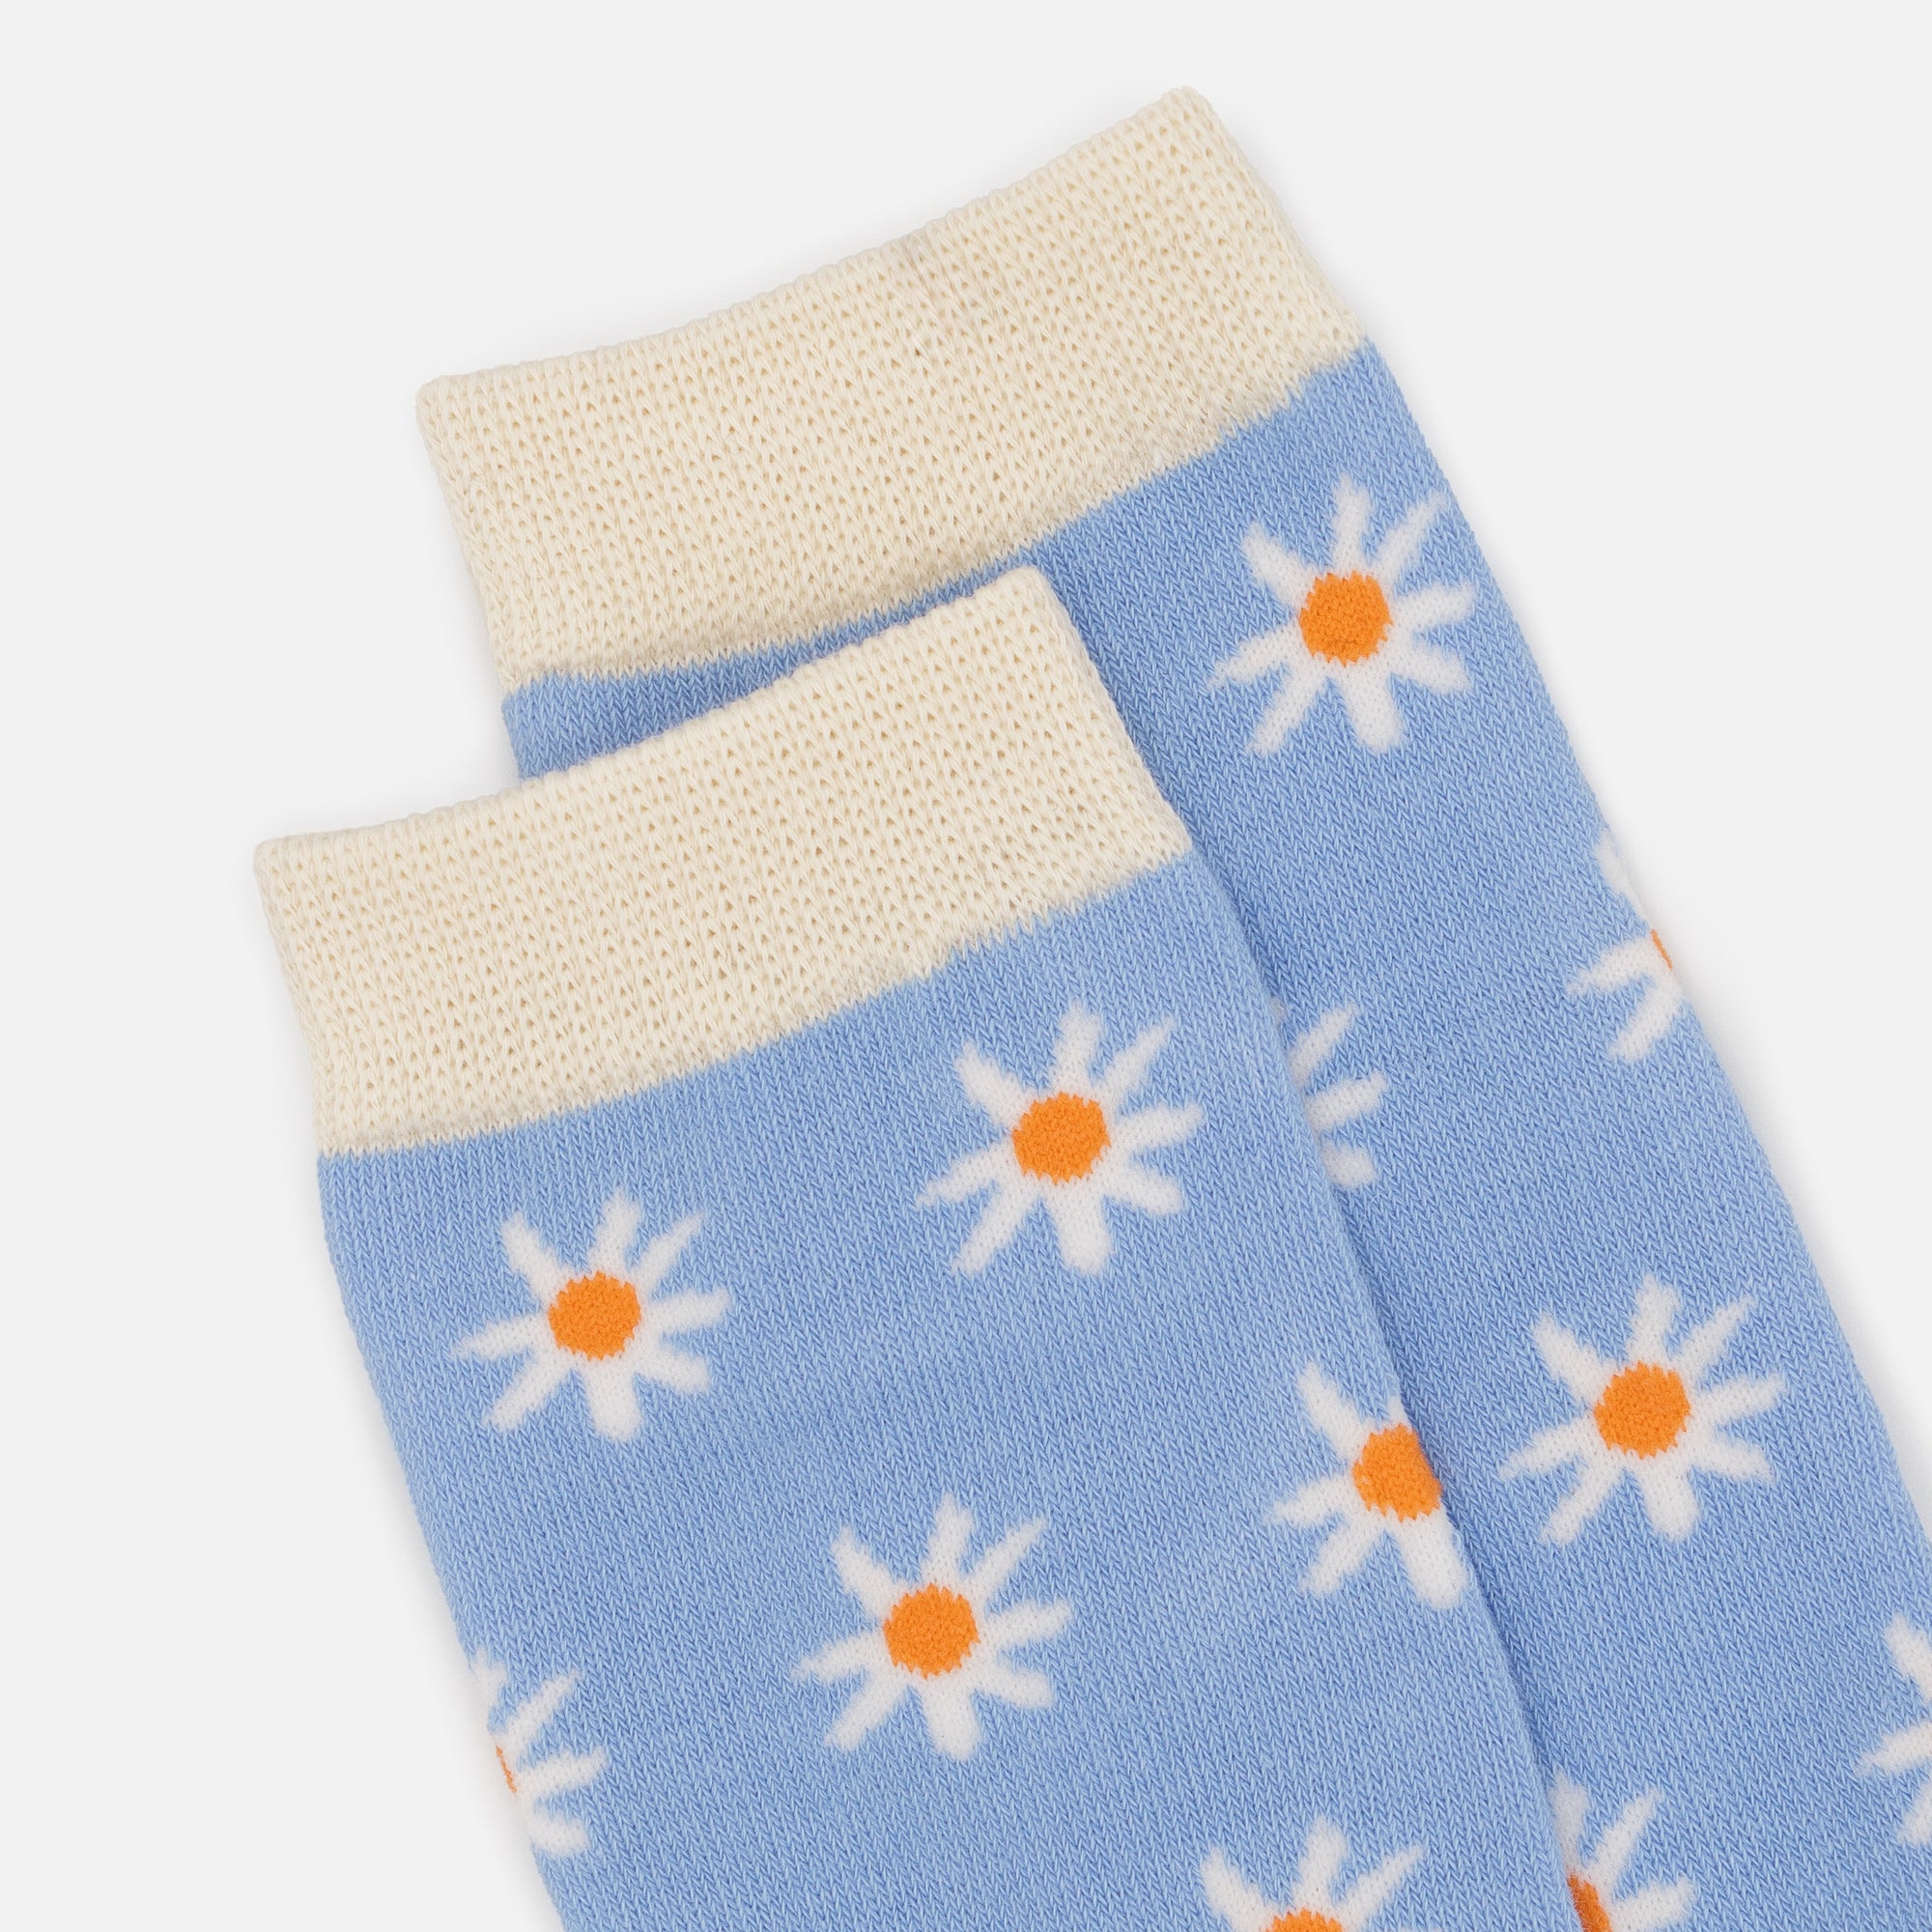 Pale blue stocking with white flowers and cream trim